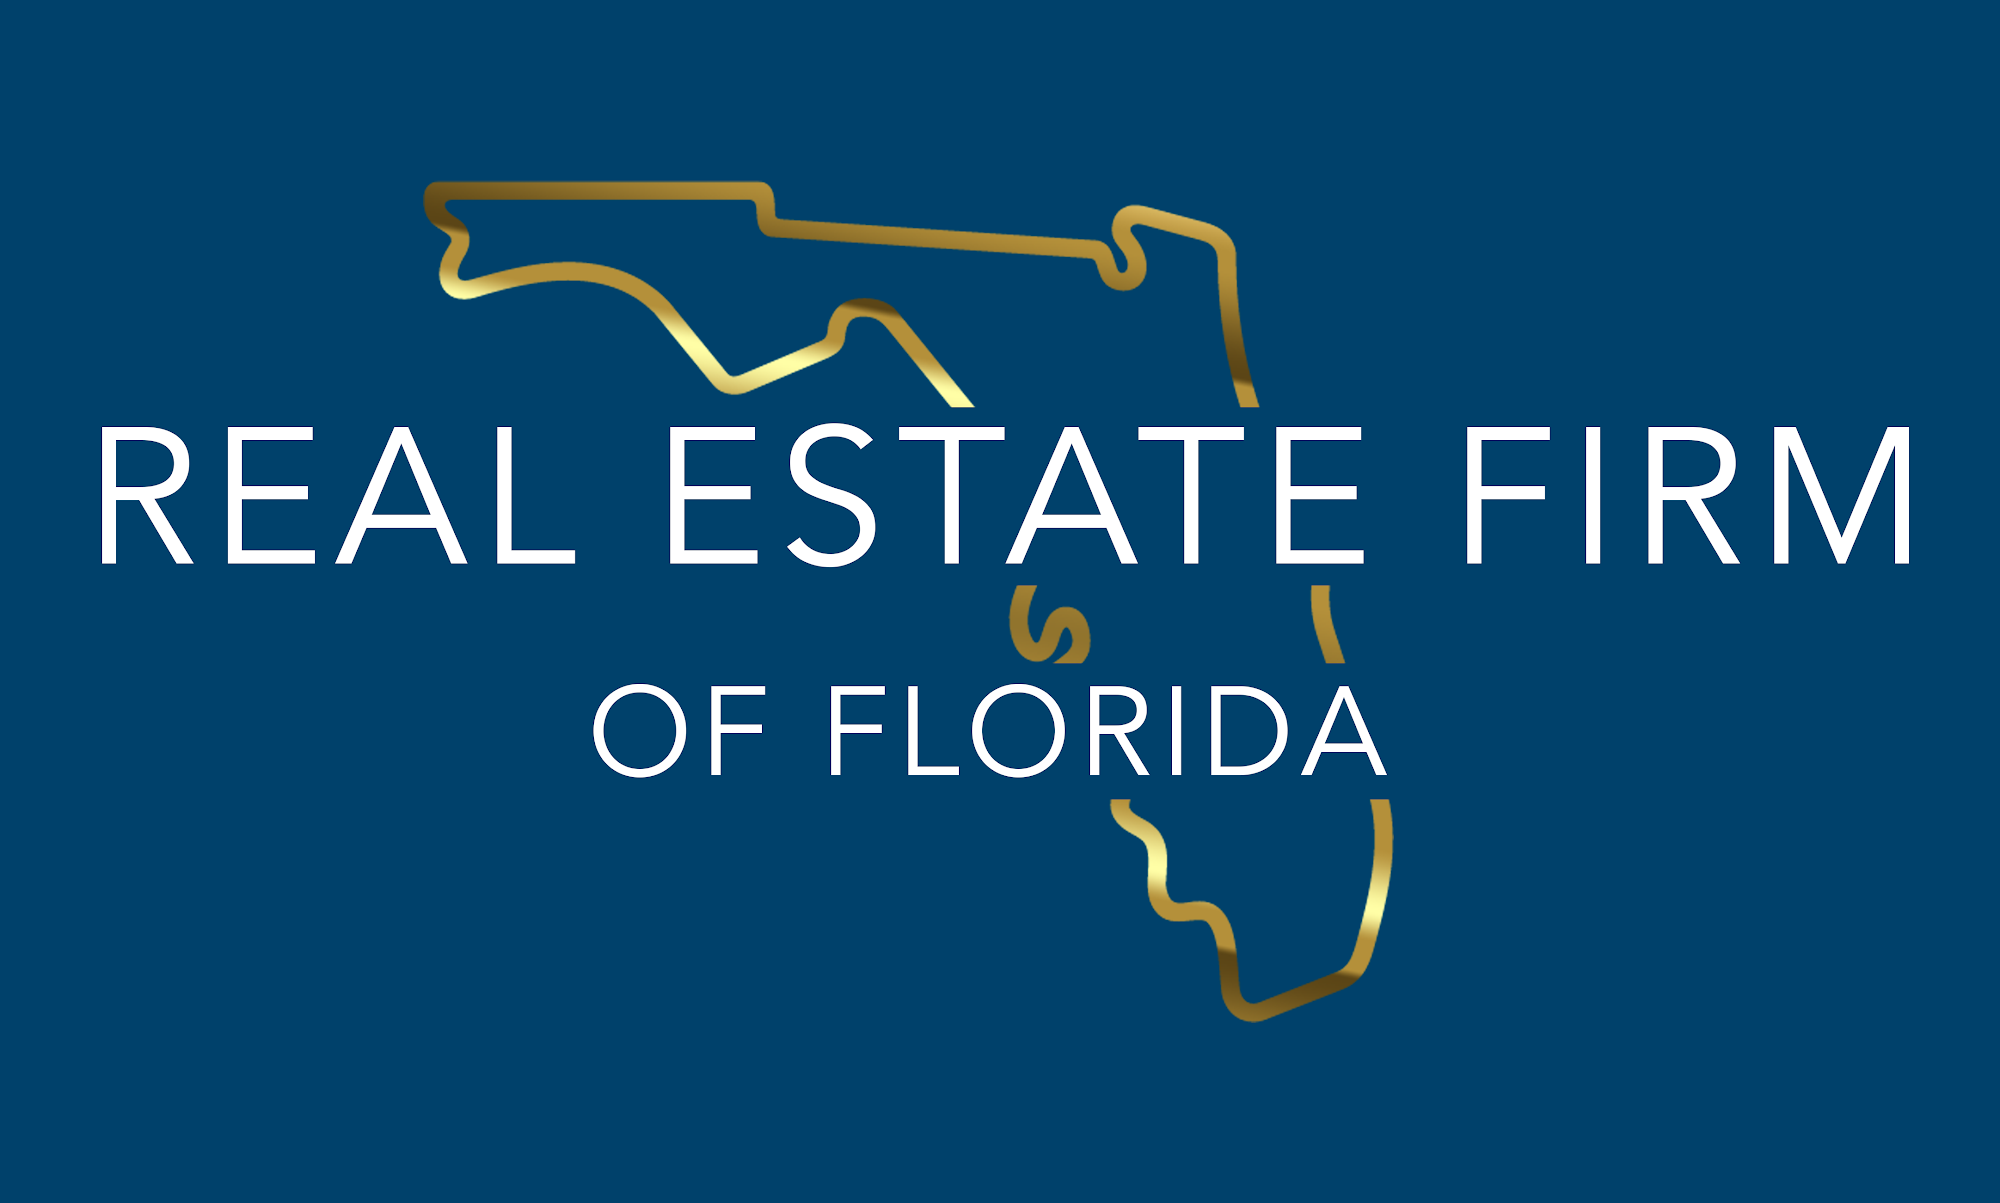 Tracy Truitt, REAL ESTATE FIRM OF FLORIDA